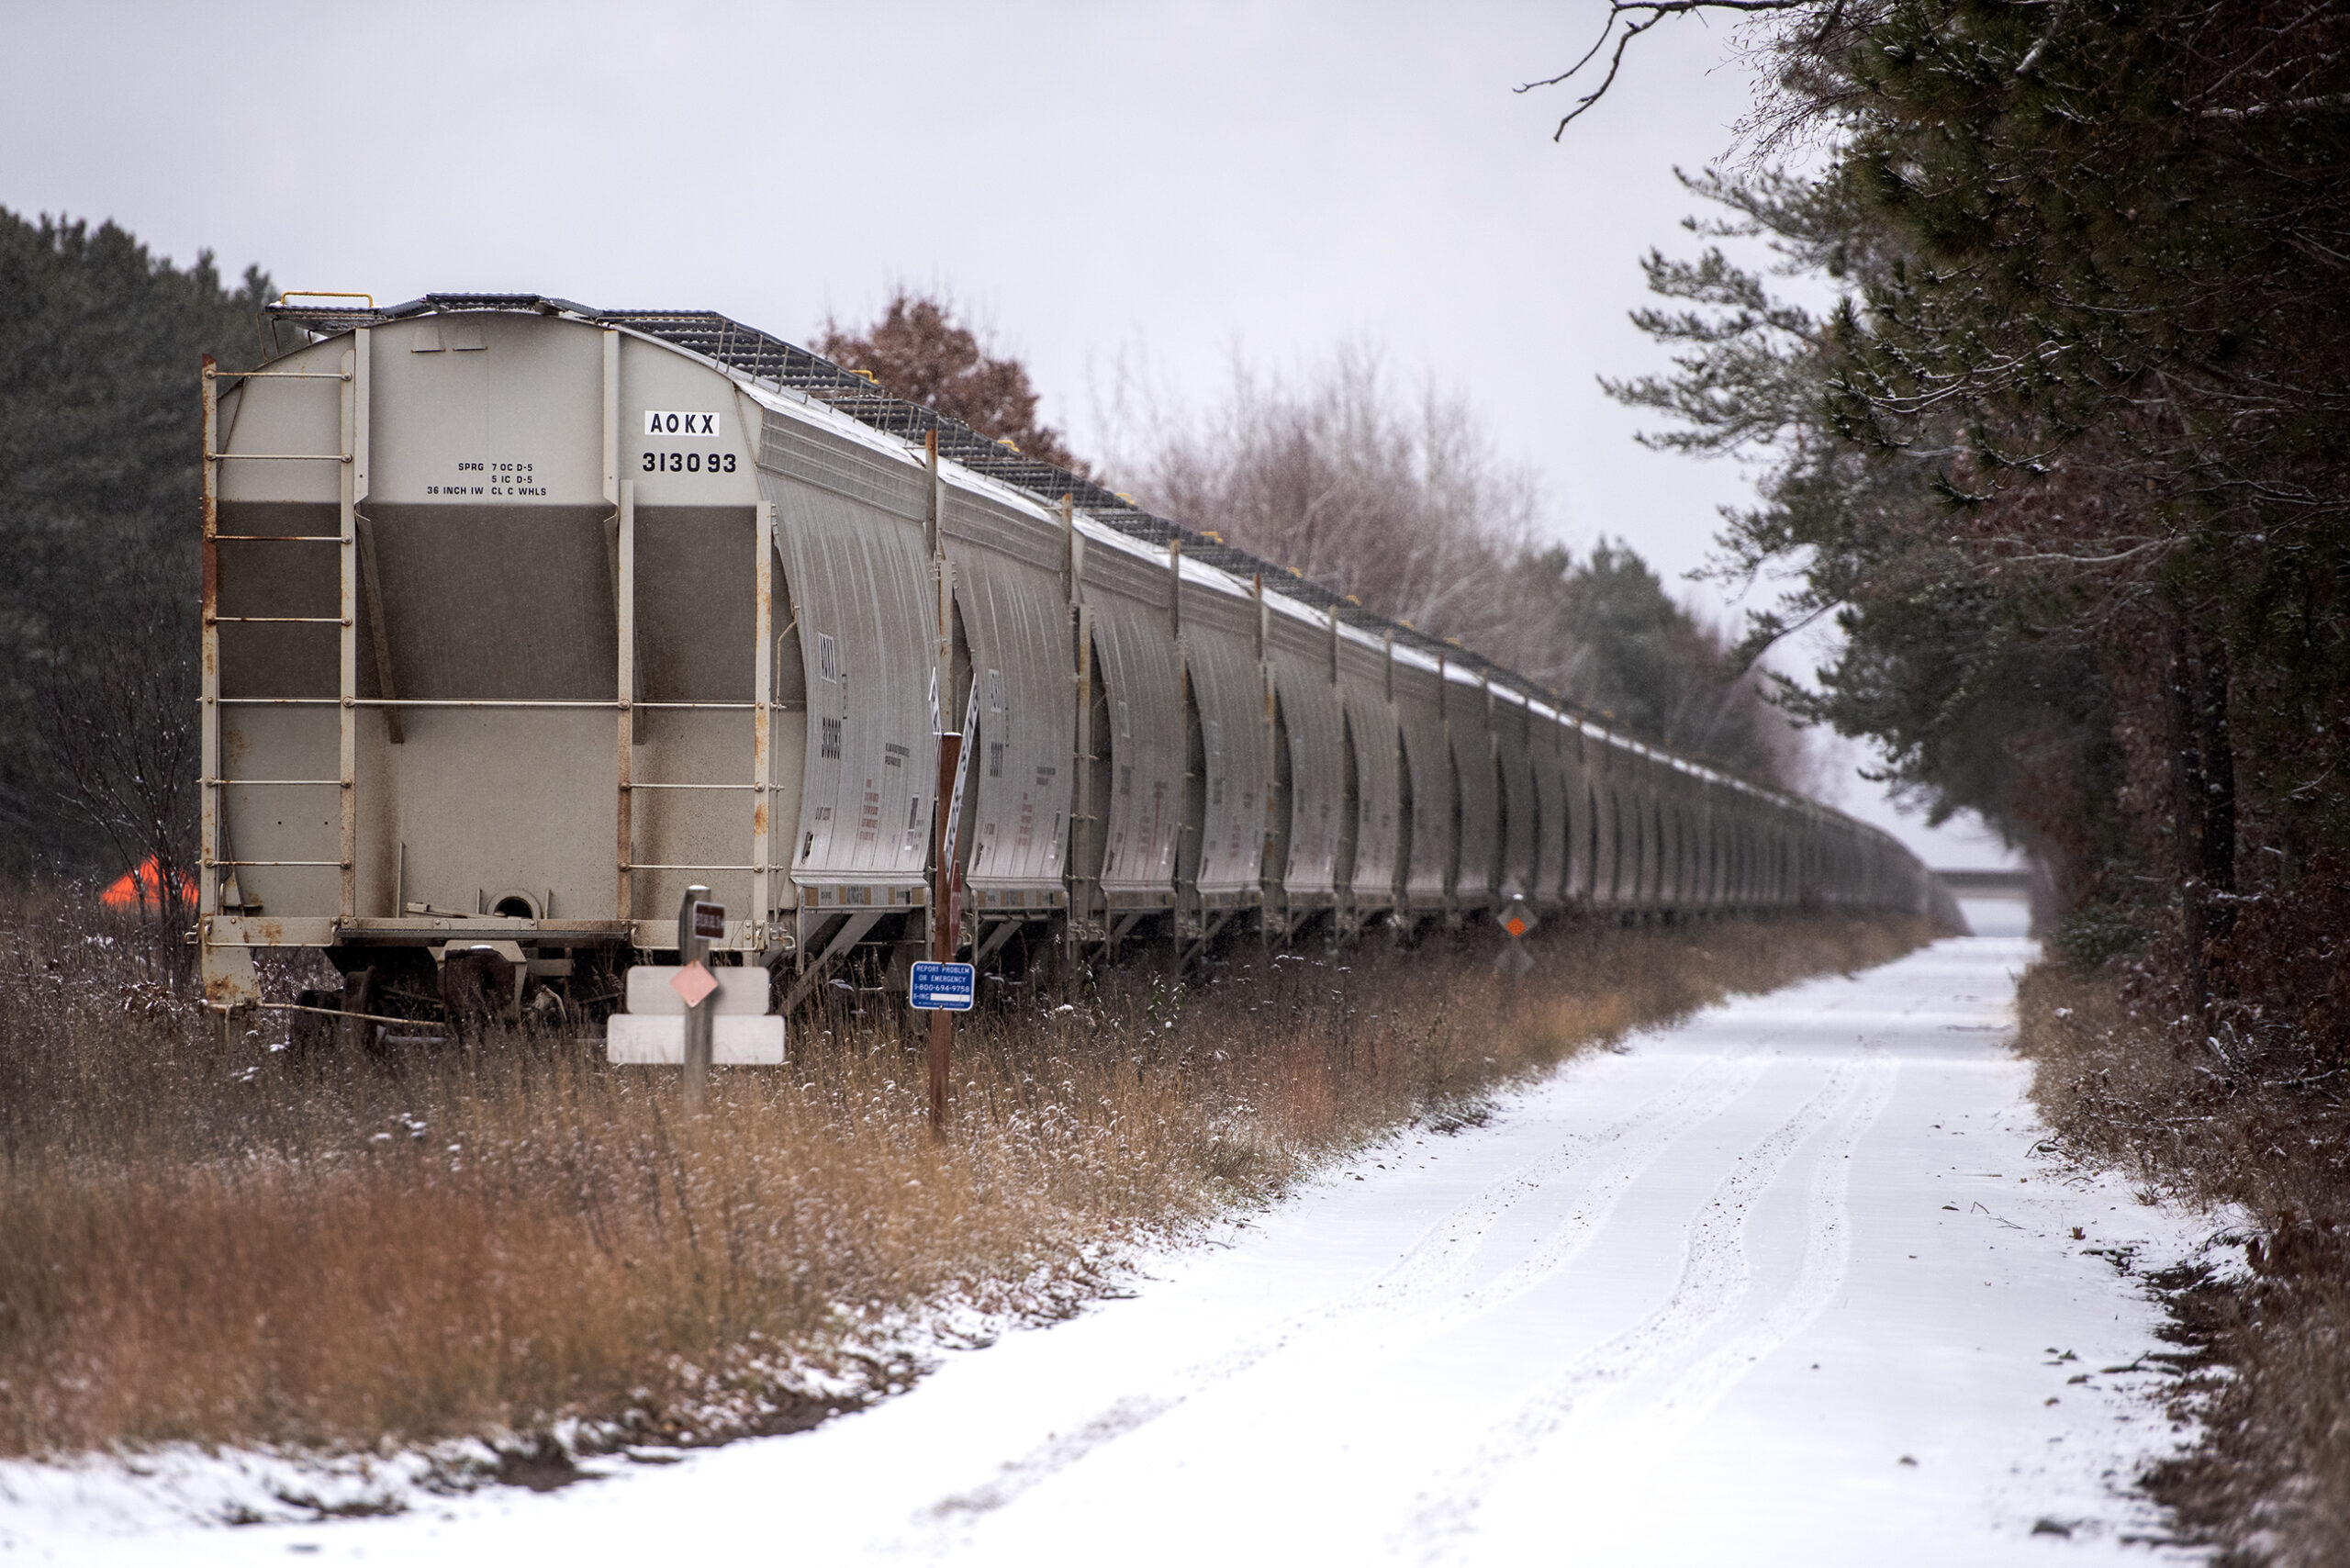 Gray metal train cars form a long line on a winter day.